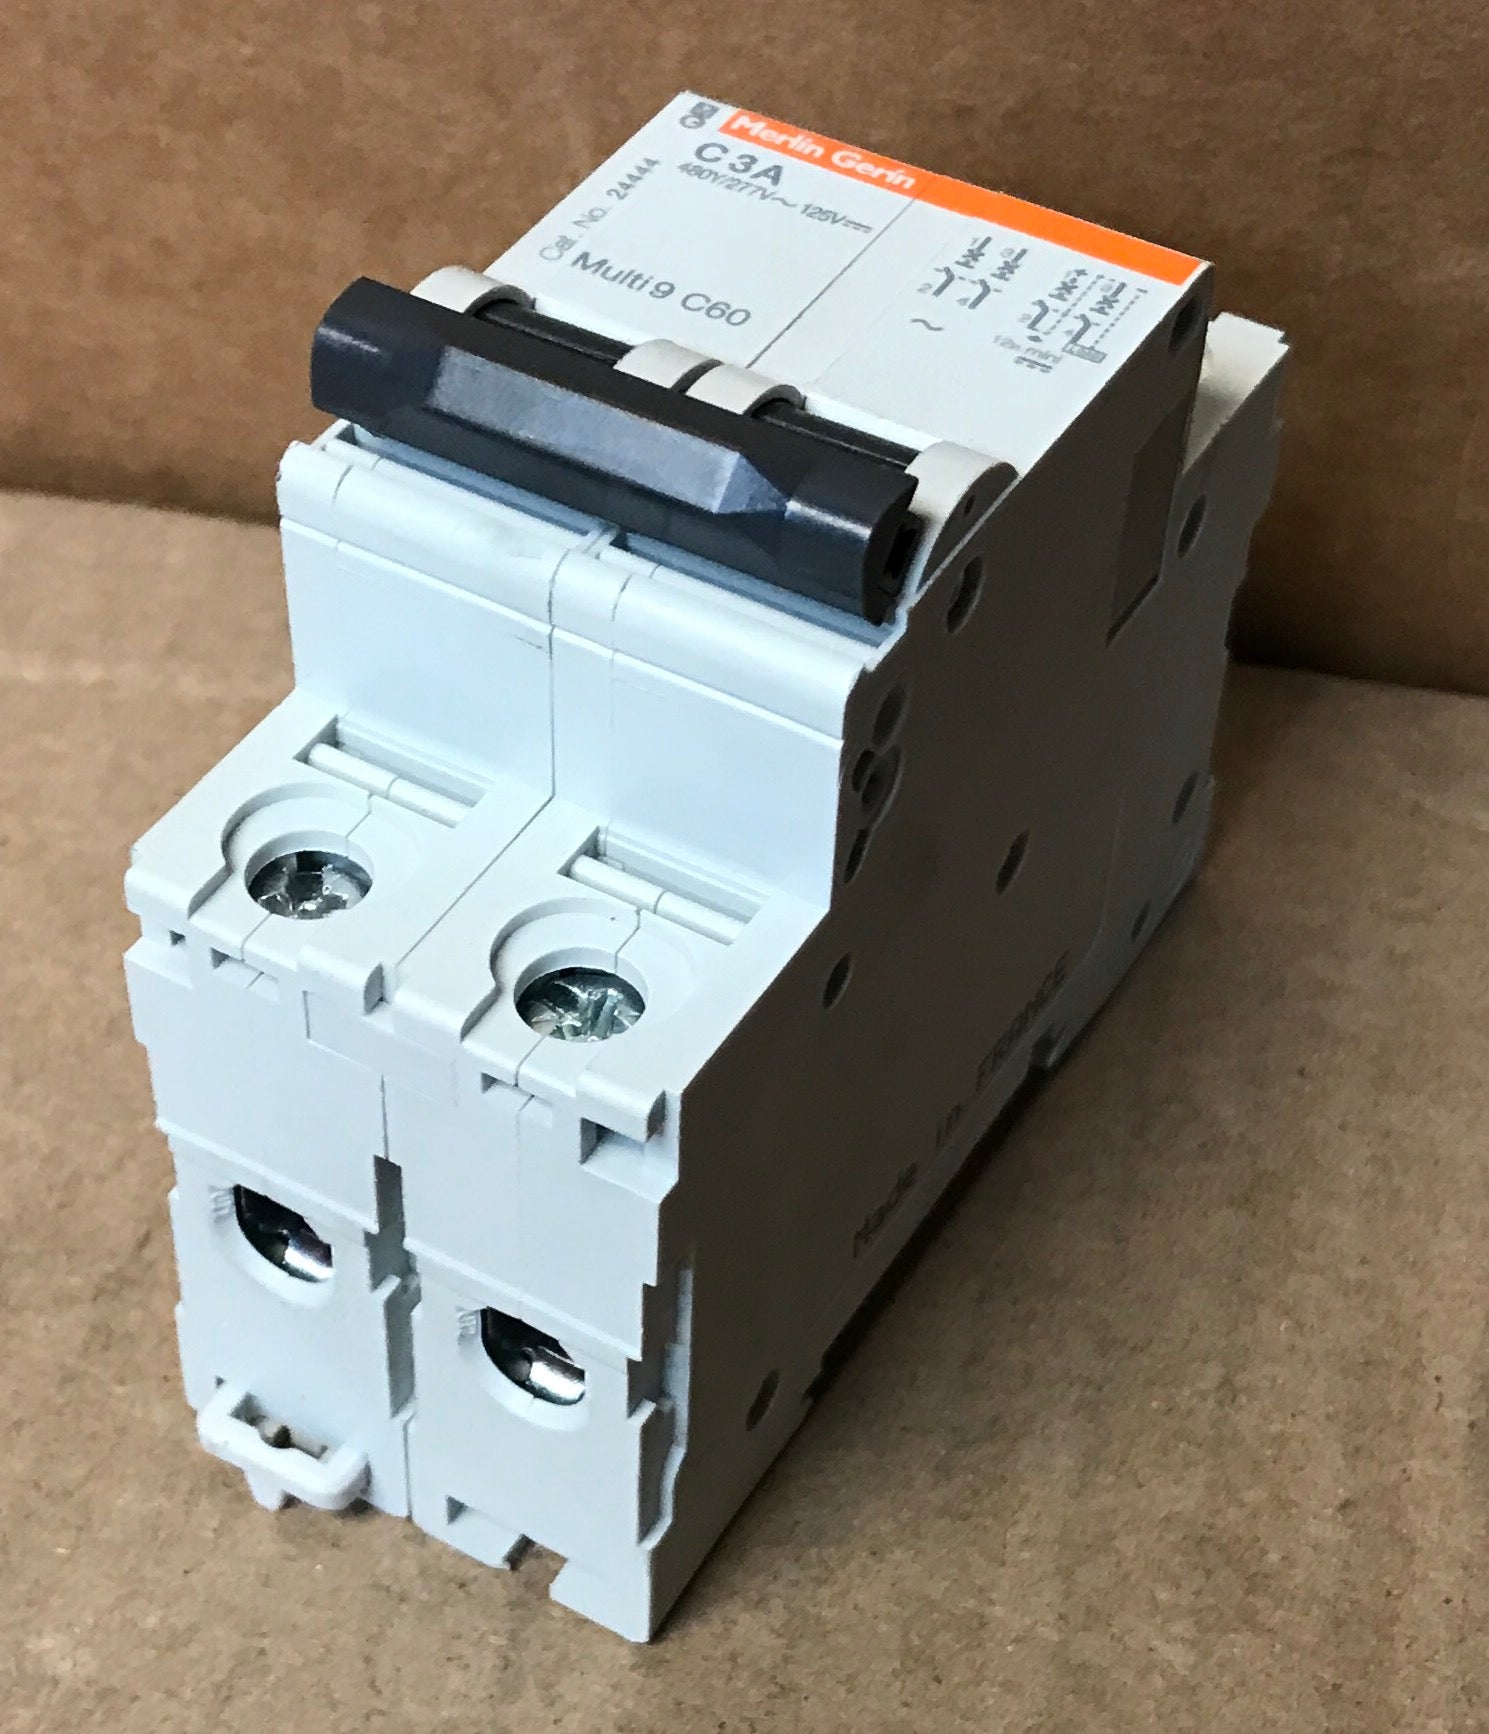 2 POLE 3 AMP "MULTI 9 C60" SUPPLEMENTARY MINIATURE THERMAL-MAGNETIC CIRCUIT BREAKER PROTECTOR 500/60-50/1 OR 3